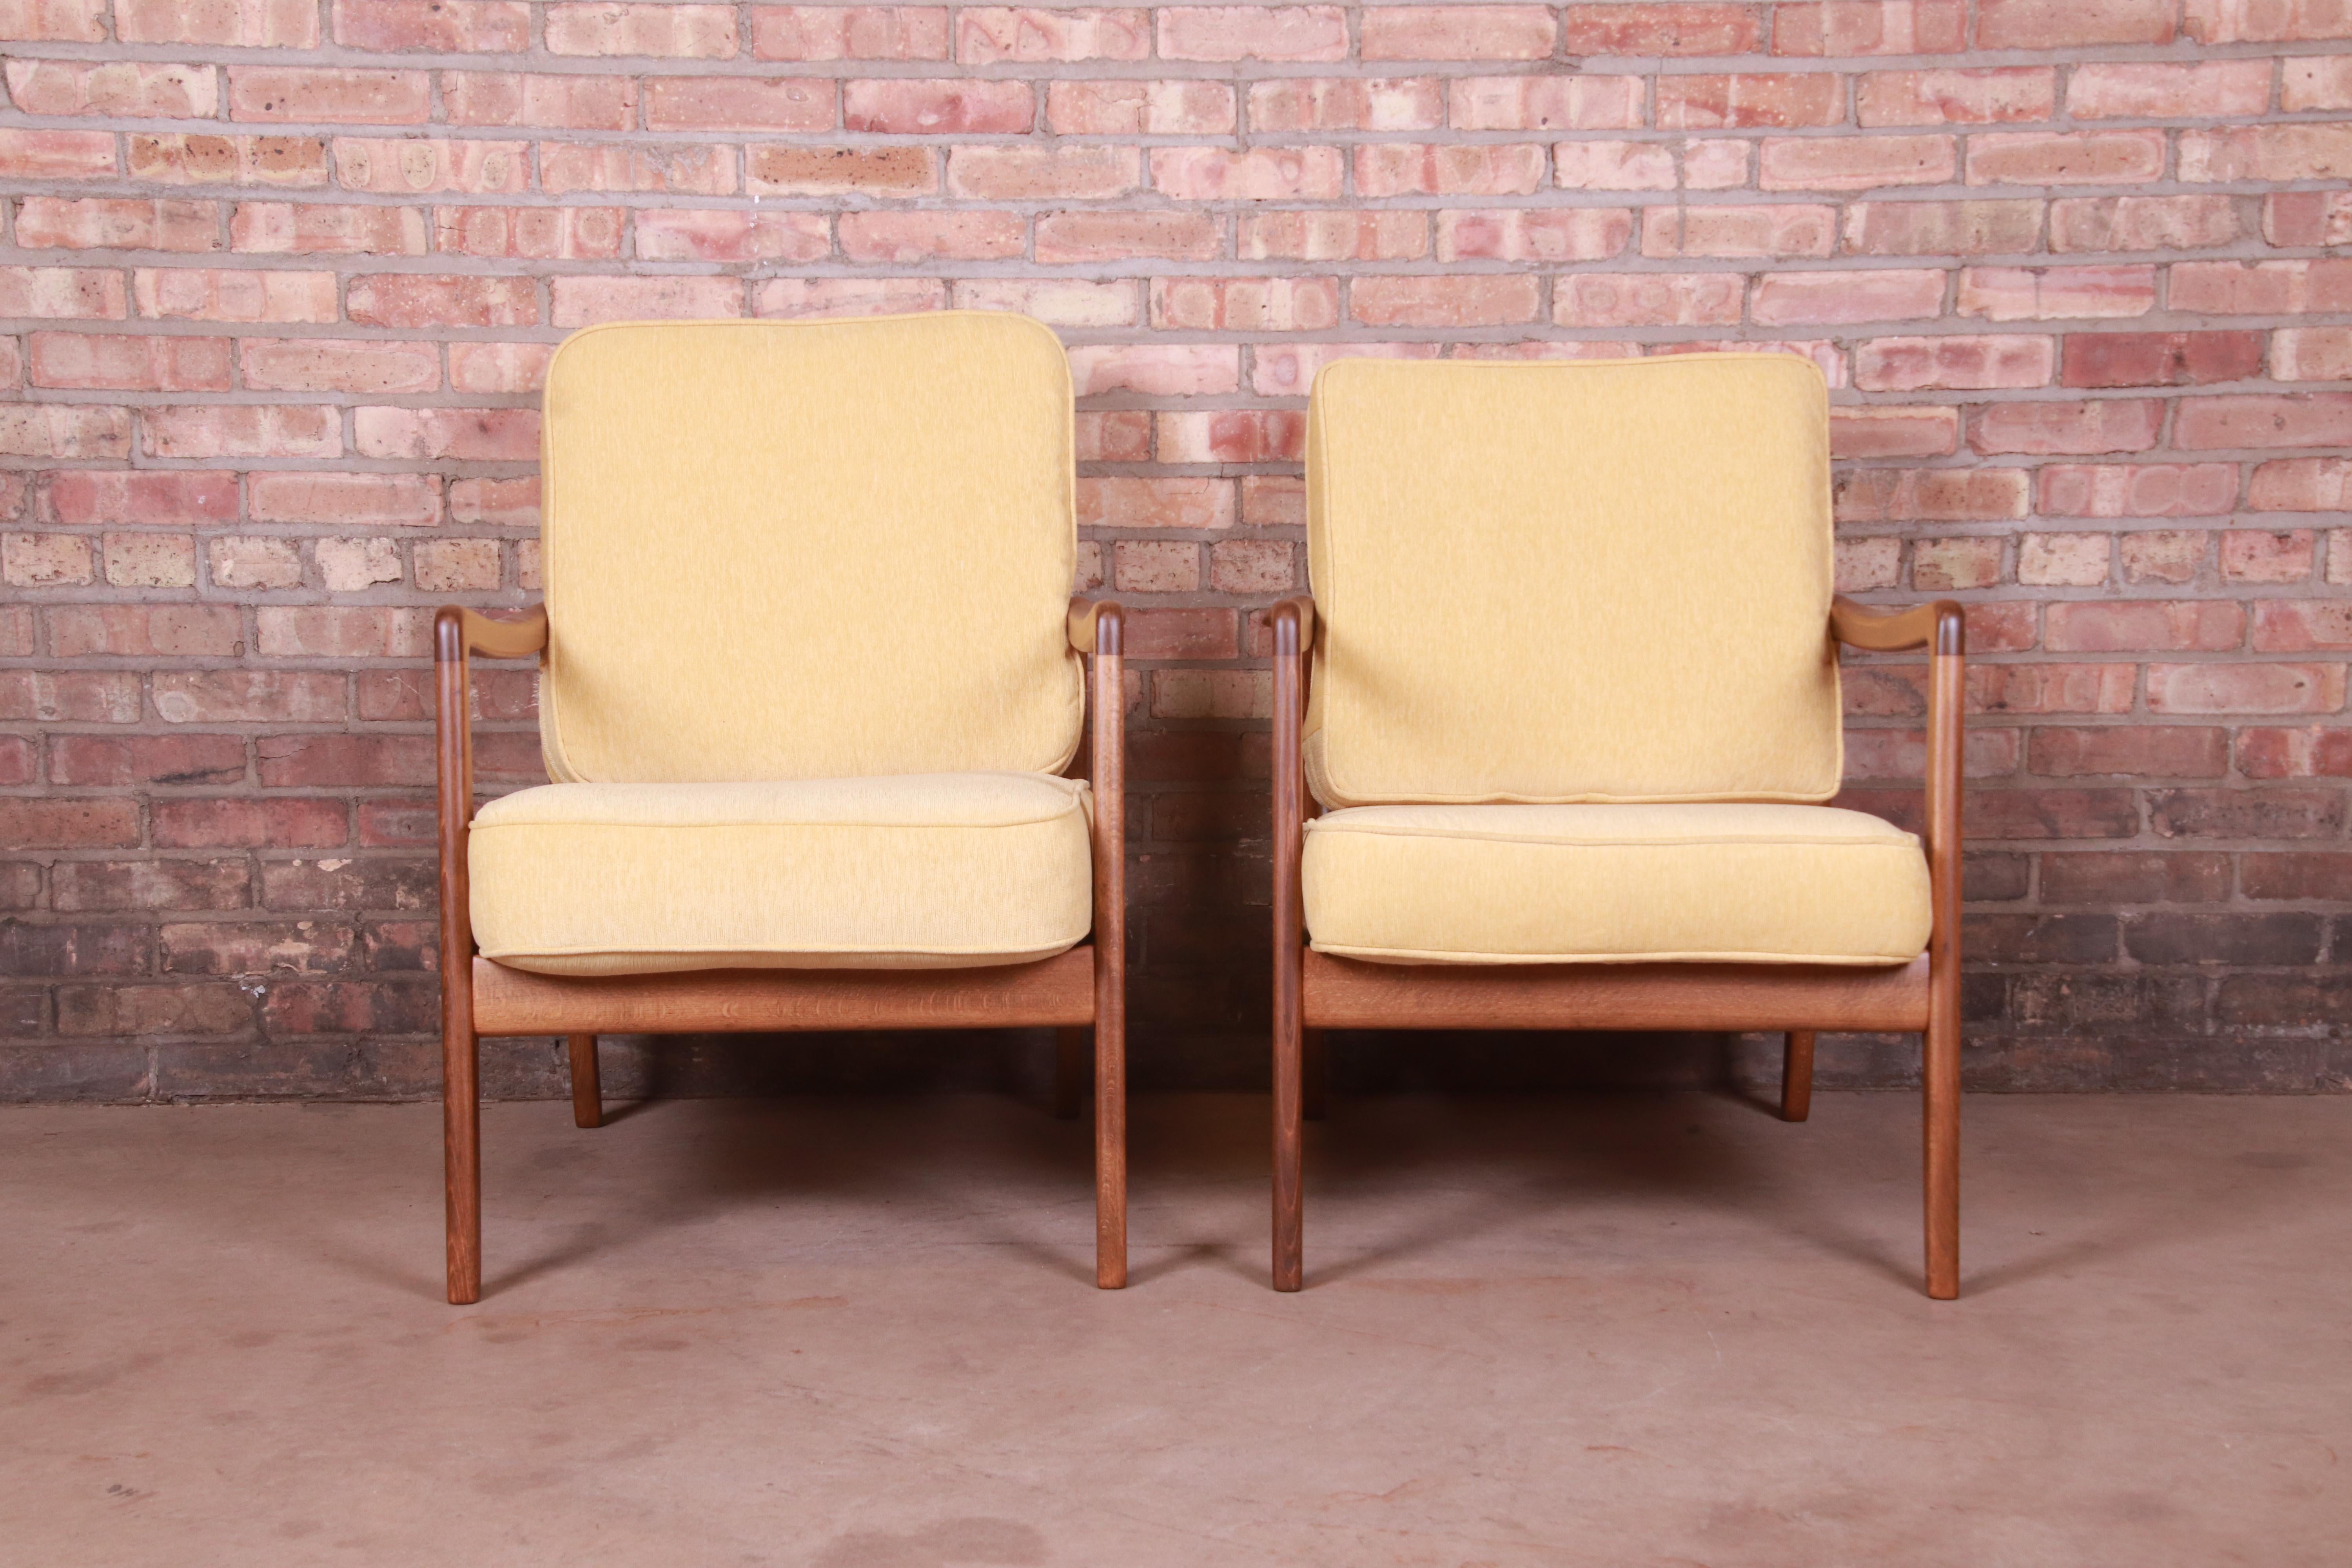 Upholstery Ole Wanscher Danish Modern Lounge Chairs and Ottomans, Newly Refinished